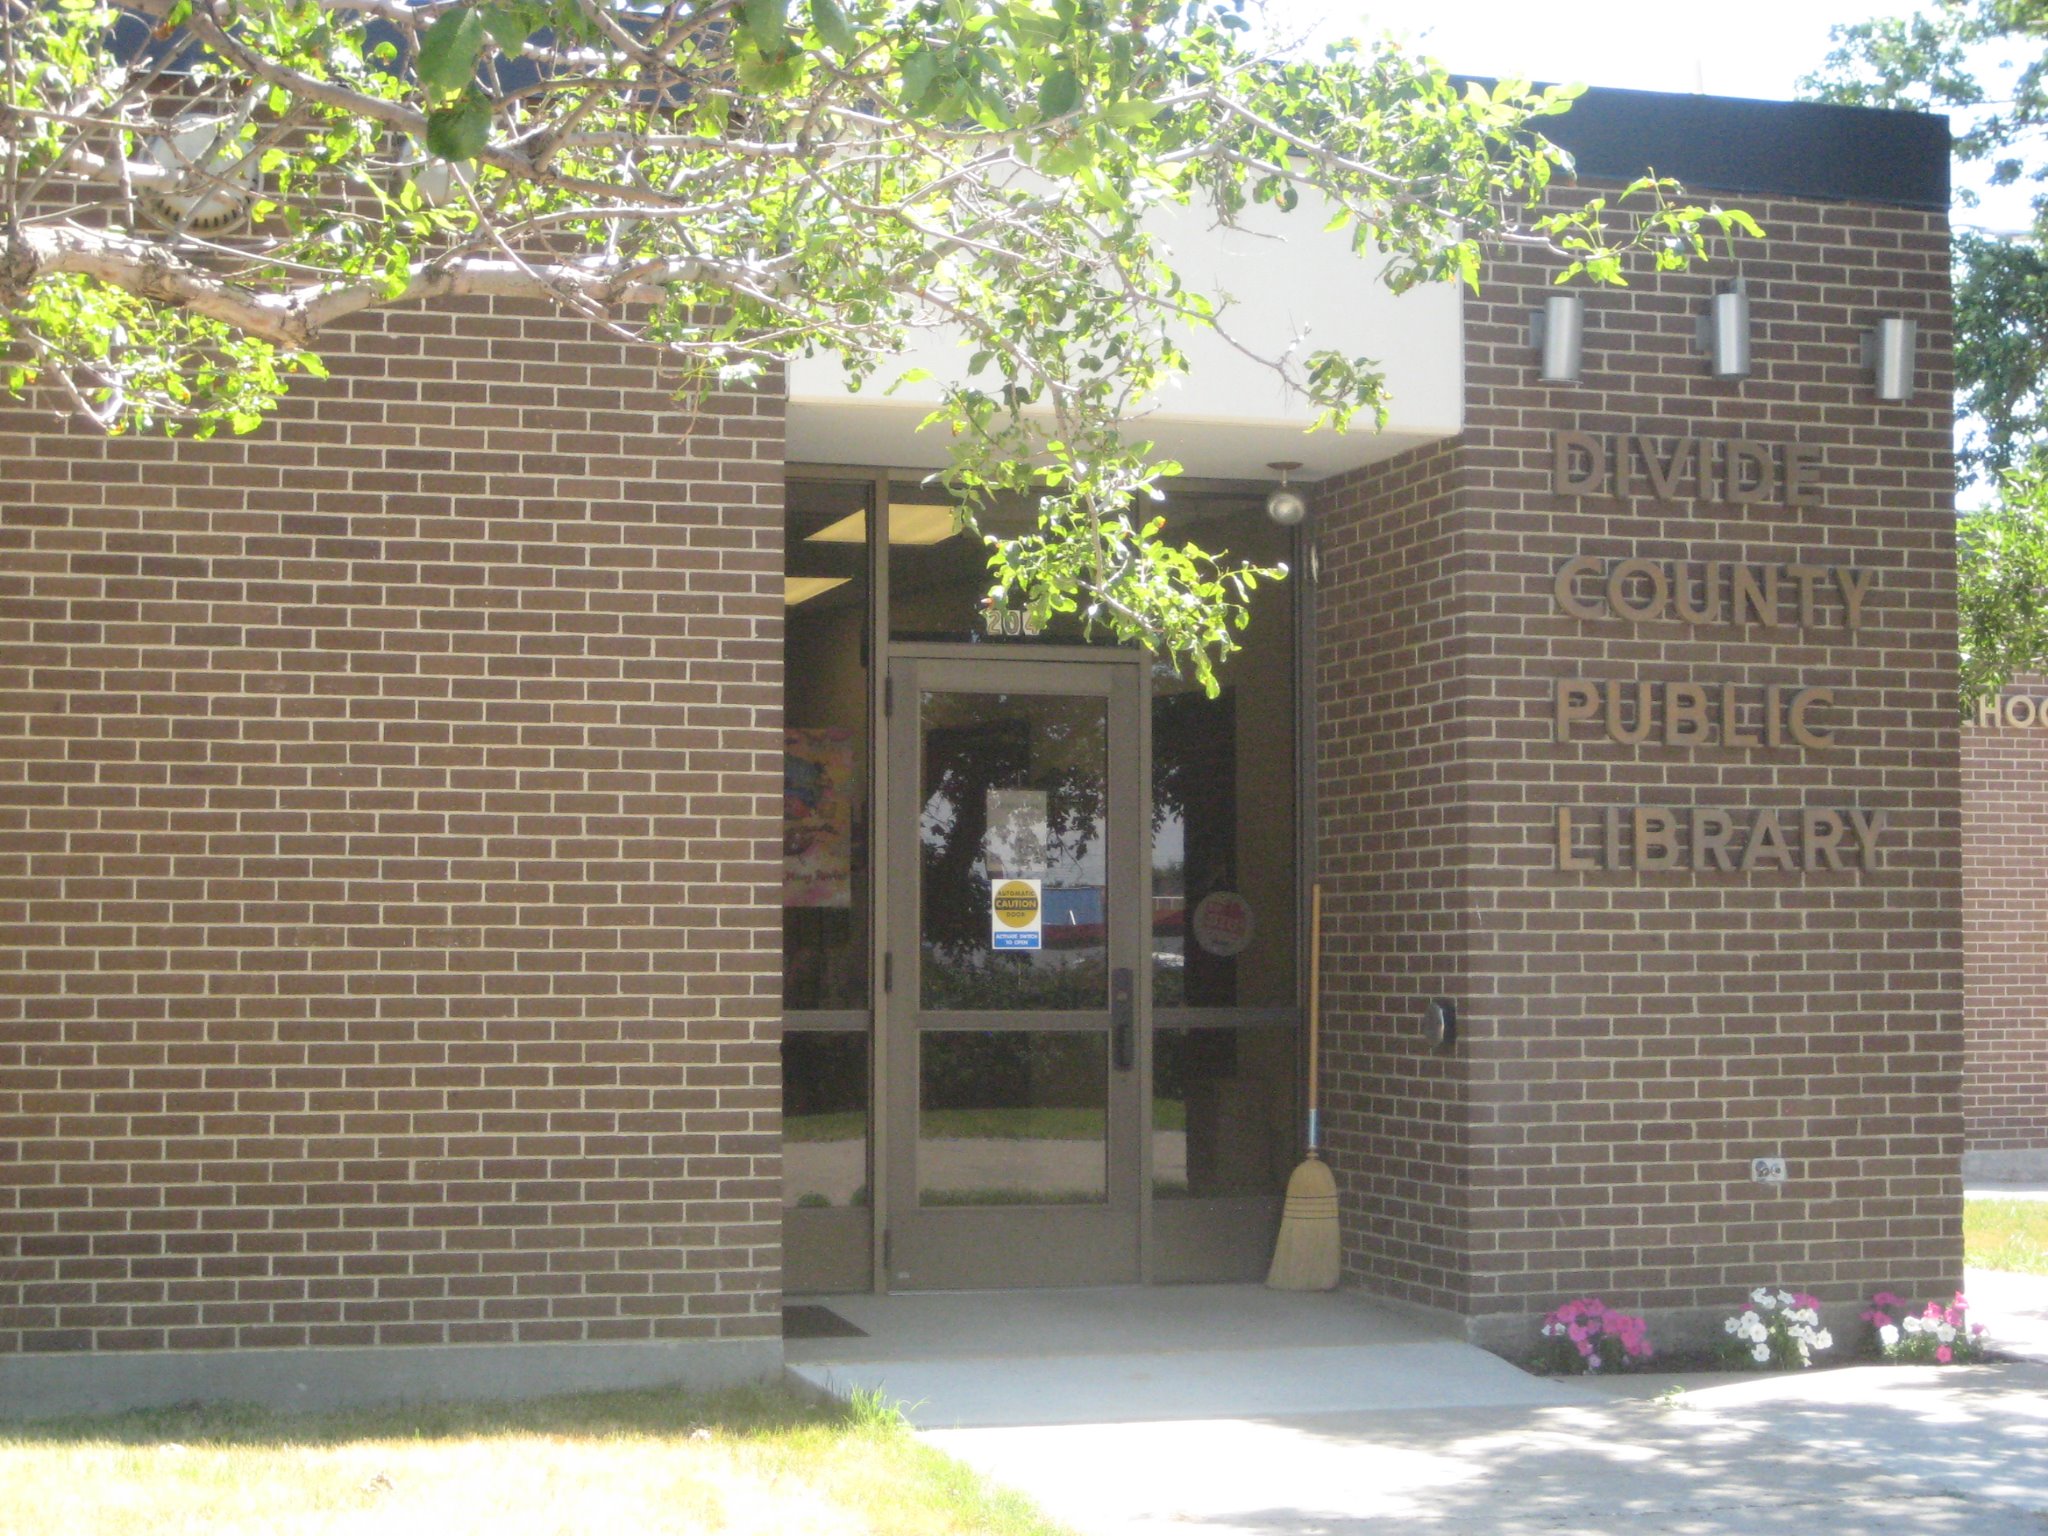 space delta township library